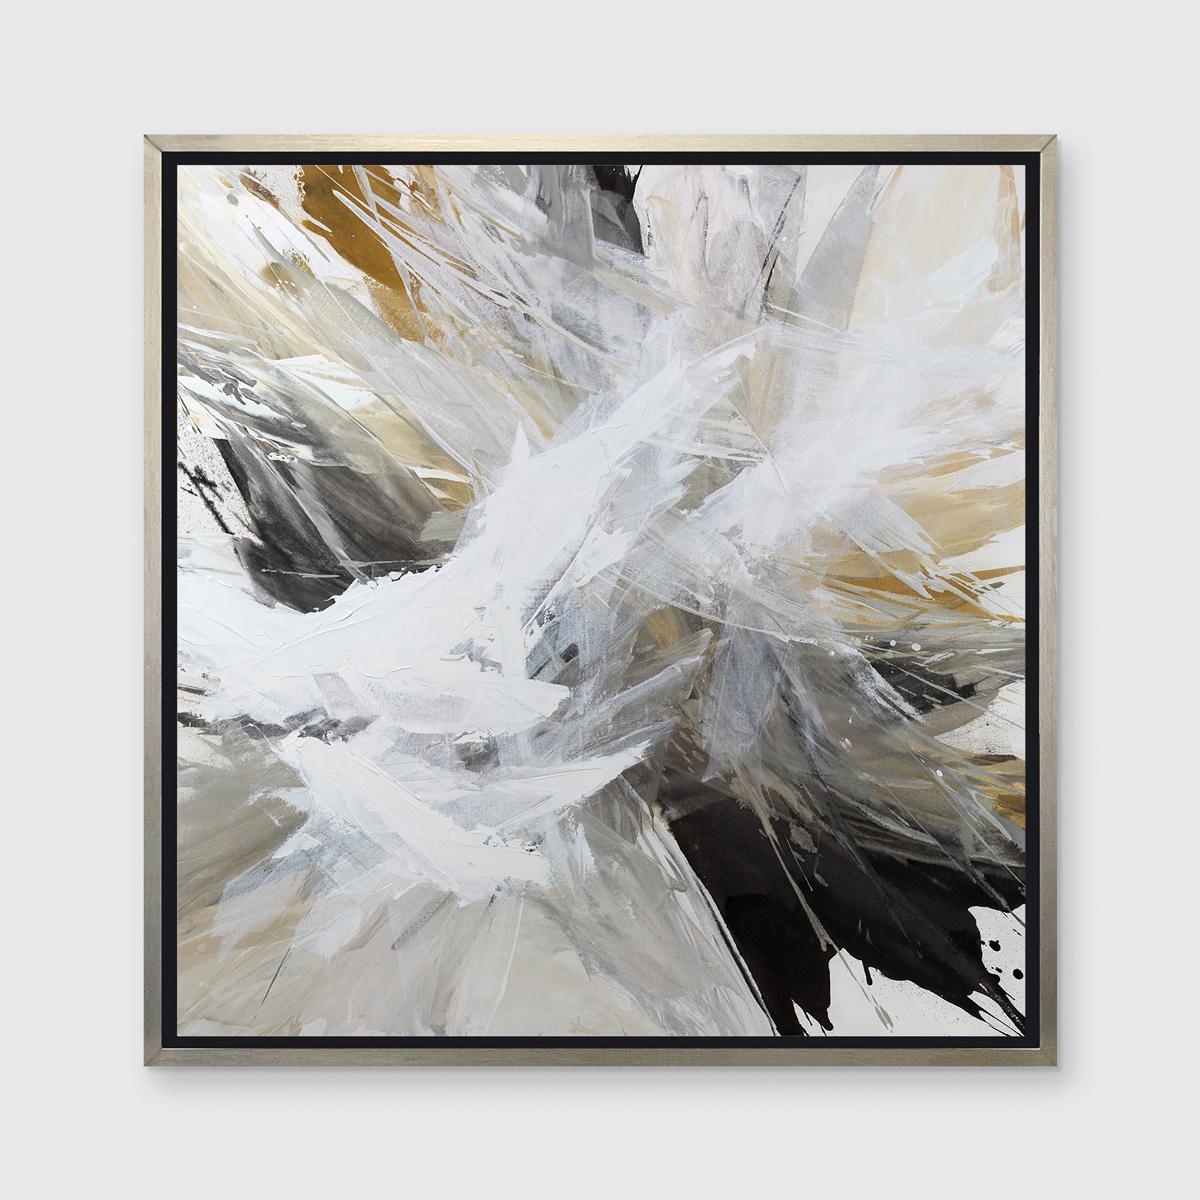 Teodora Guererra Abstract Print - "Today I Choose Palette Knives, " Framed Limited Edition Giclee Print, 40" x 40"